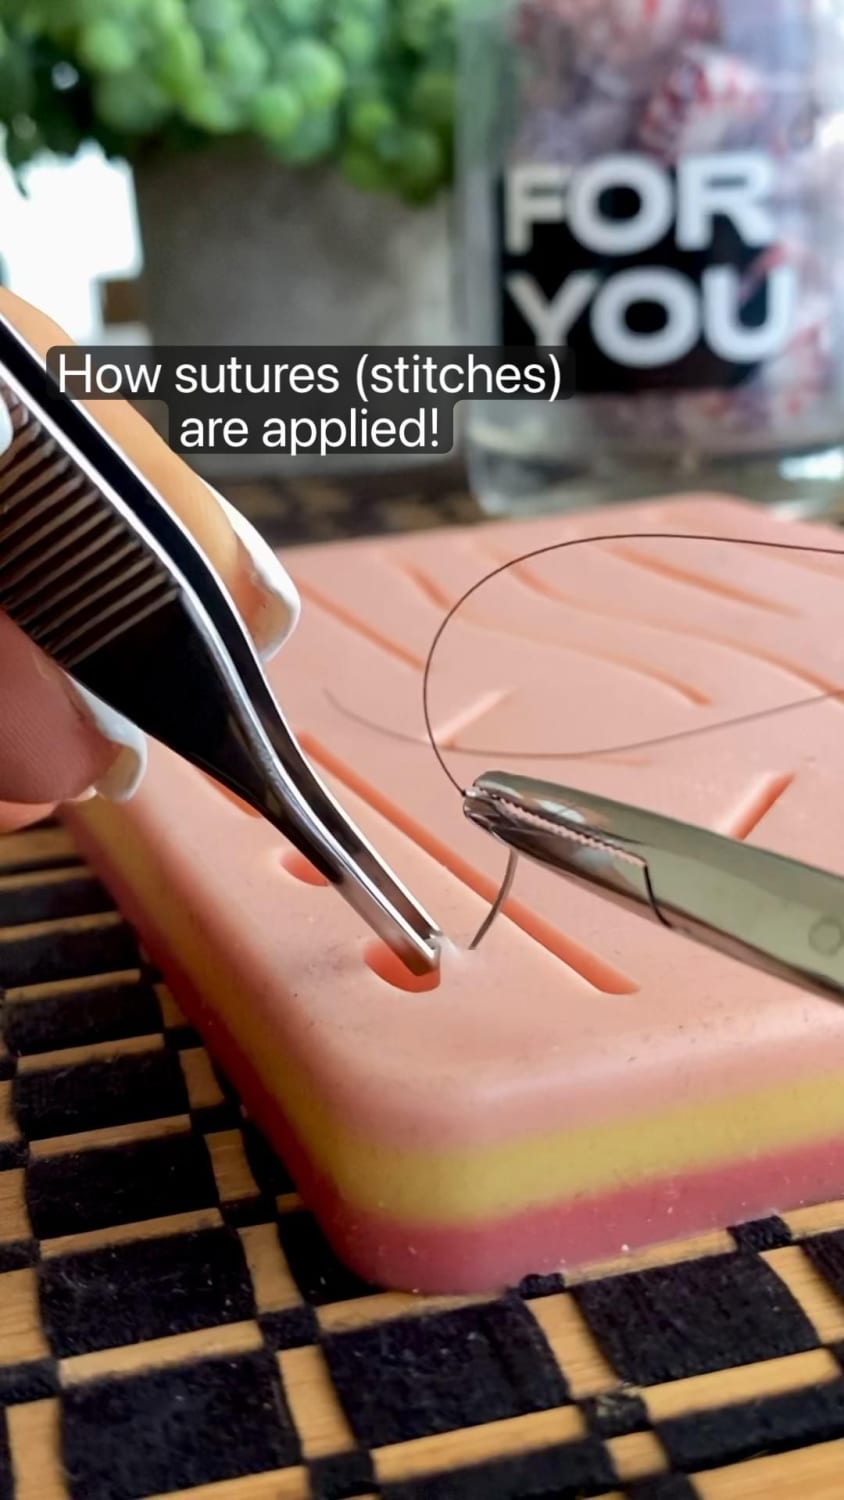 How sutures (stitches) are applied!